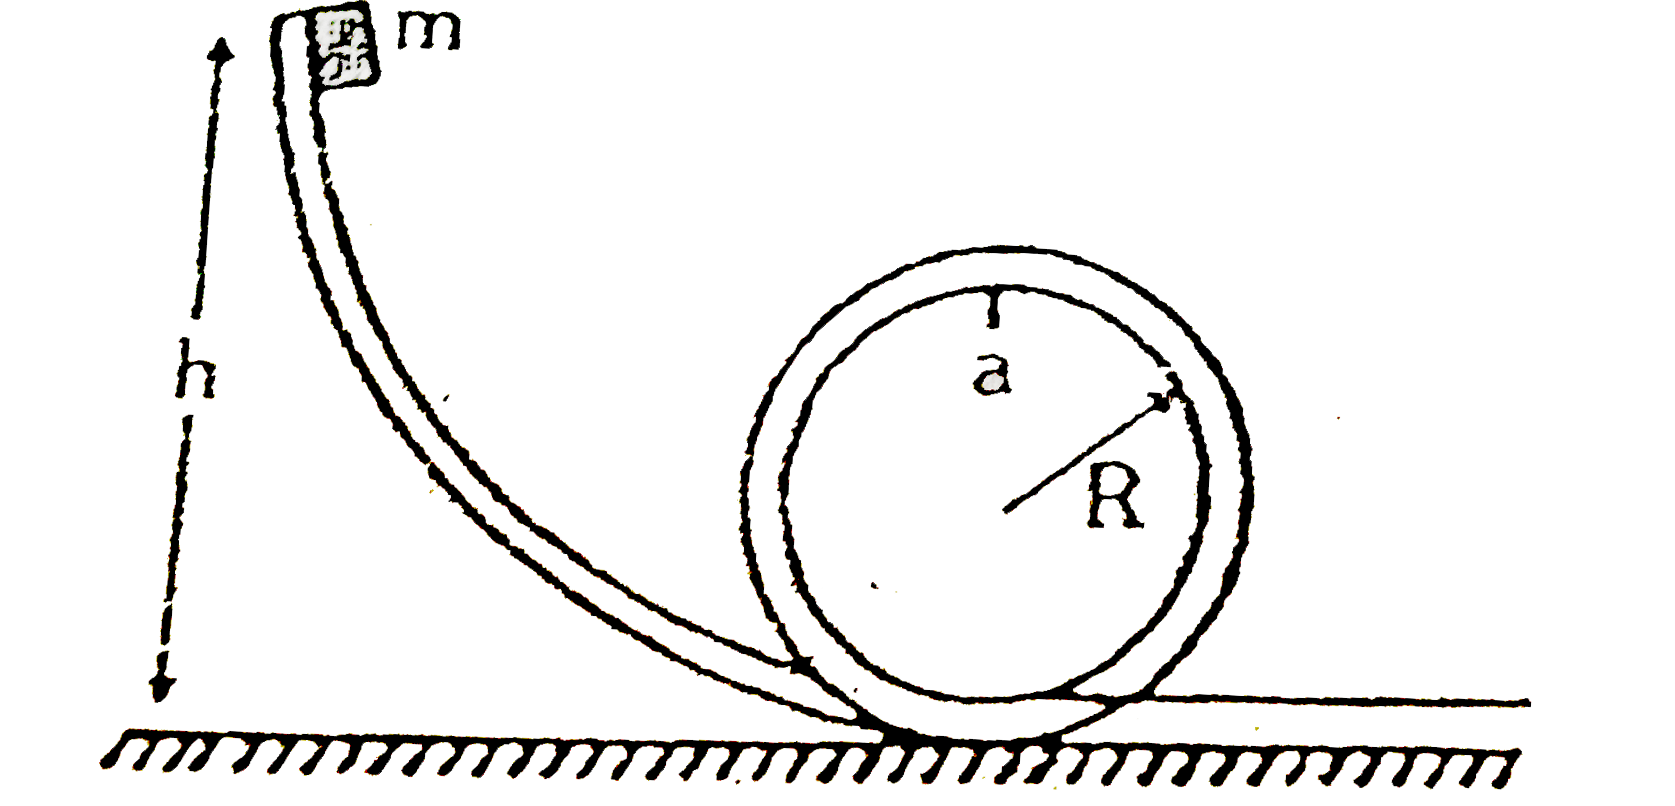 An object of mass m is released from rest at a height h above the surface of a table. The object slides along the inside of the loop. The loop track consisting of a ramp and a circular loop of radius R shown in the figure. Assume that the track is frictionless. When  the object is at the top of the circular track it pushes against the track with a force equal to three times its weight. What height was the object dropped from?